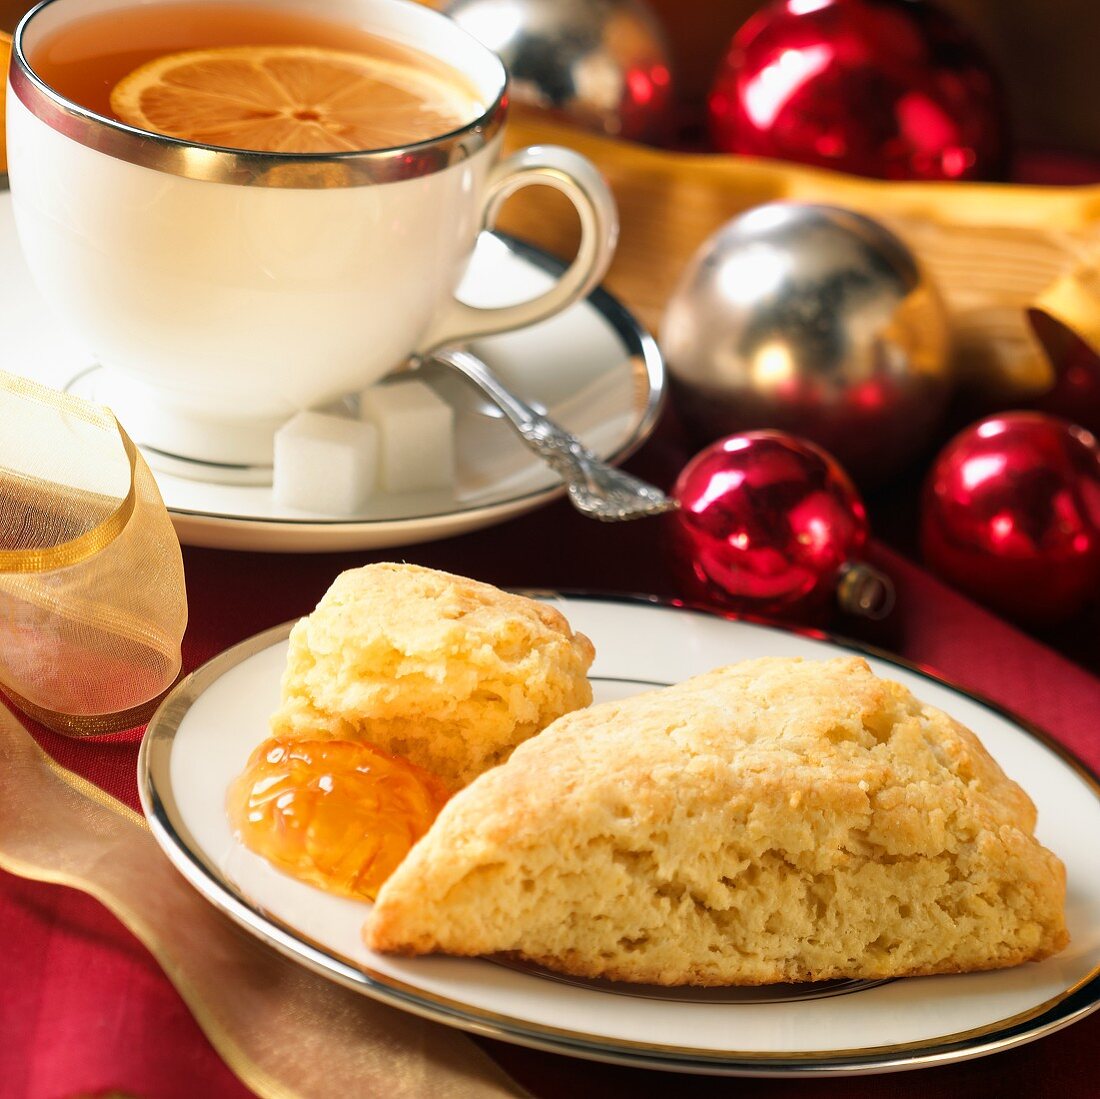 Scone with Marmalade; Cup of Tea; Christmas Decorations